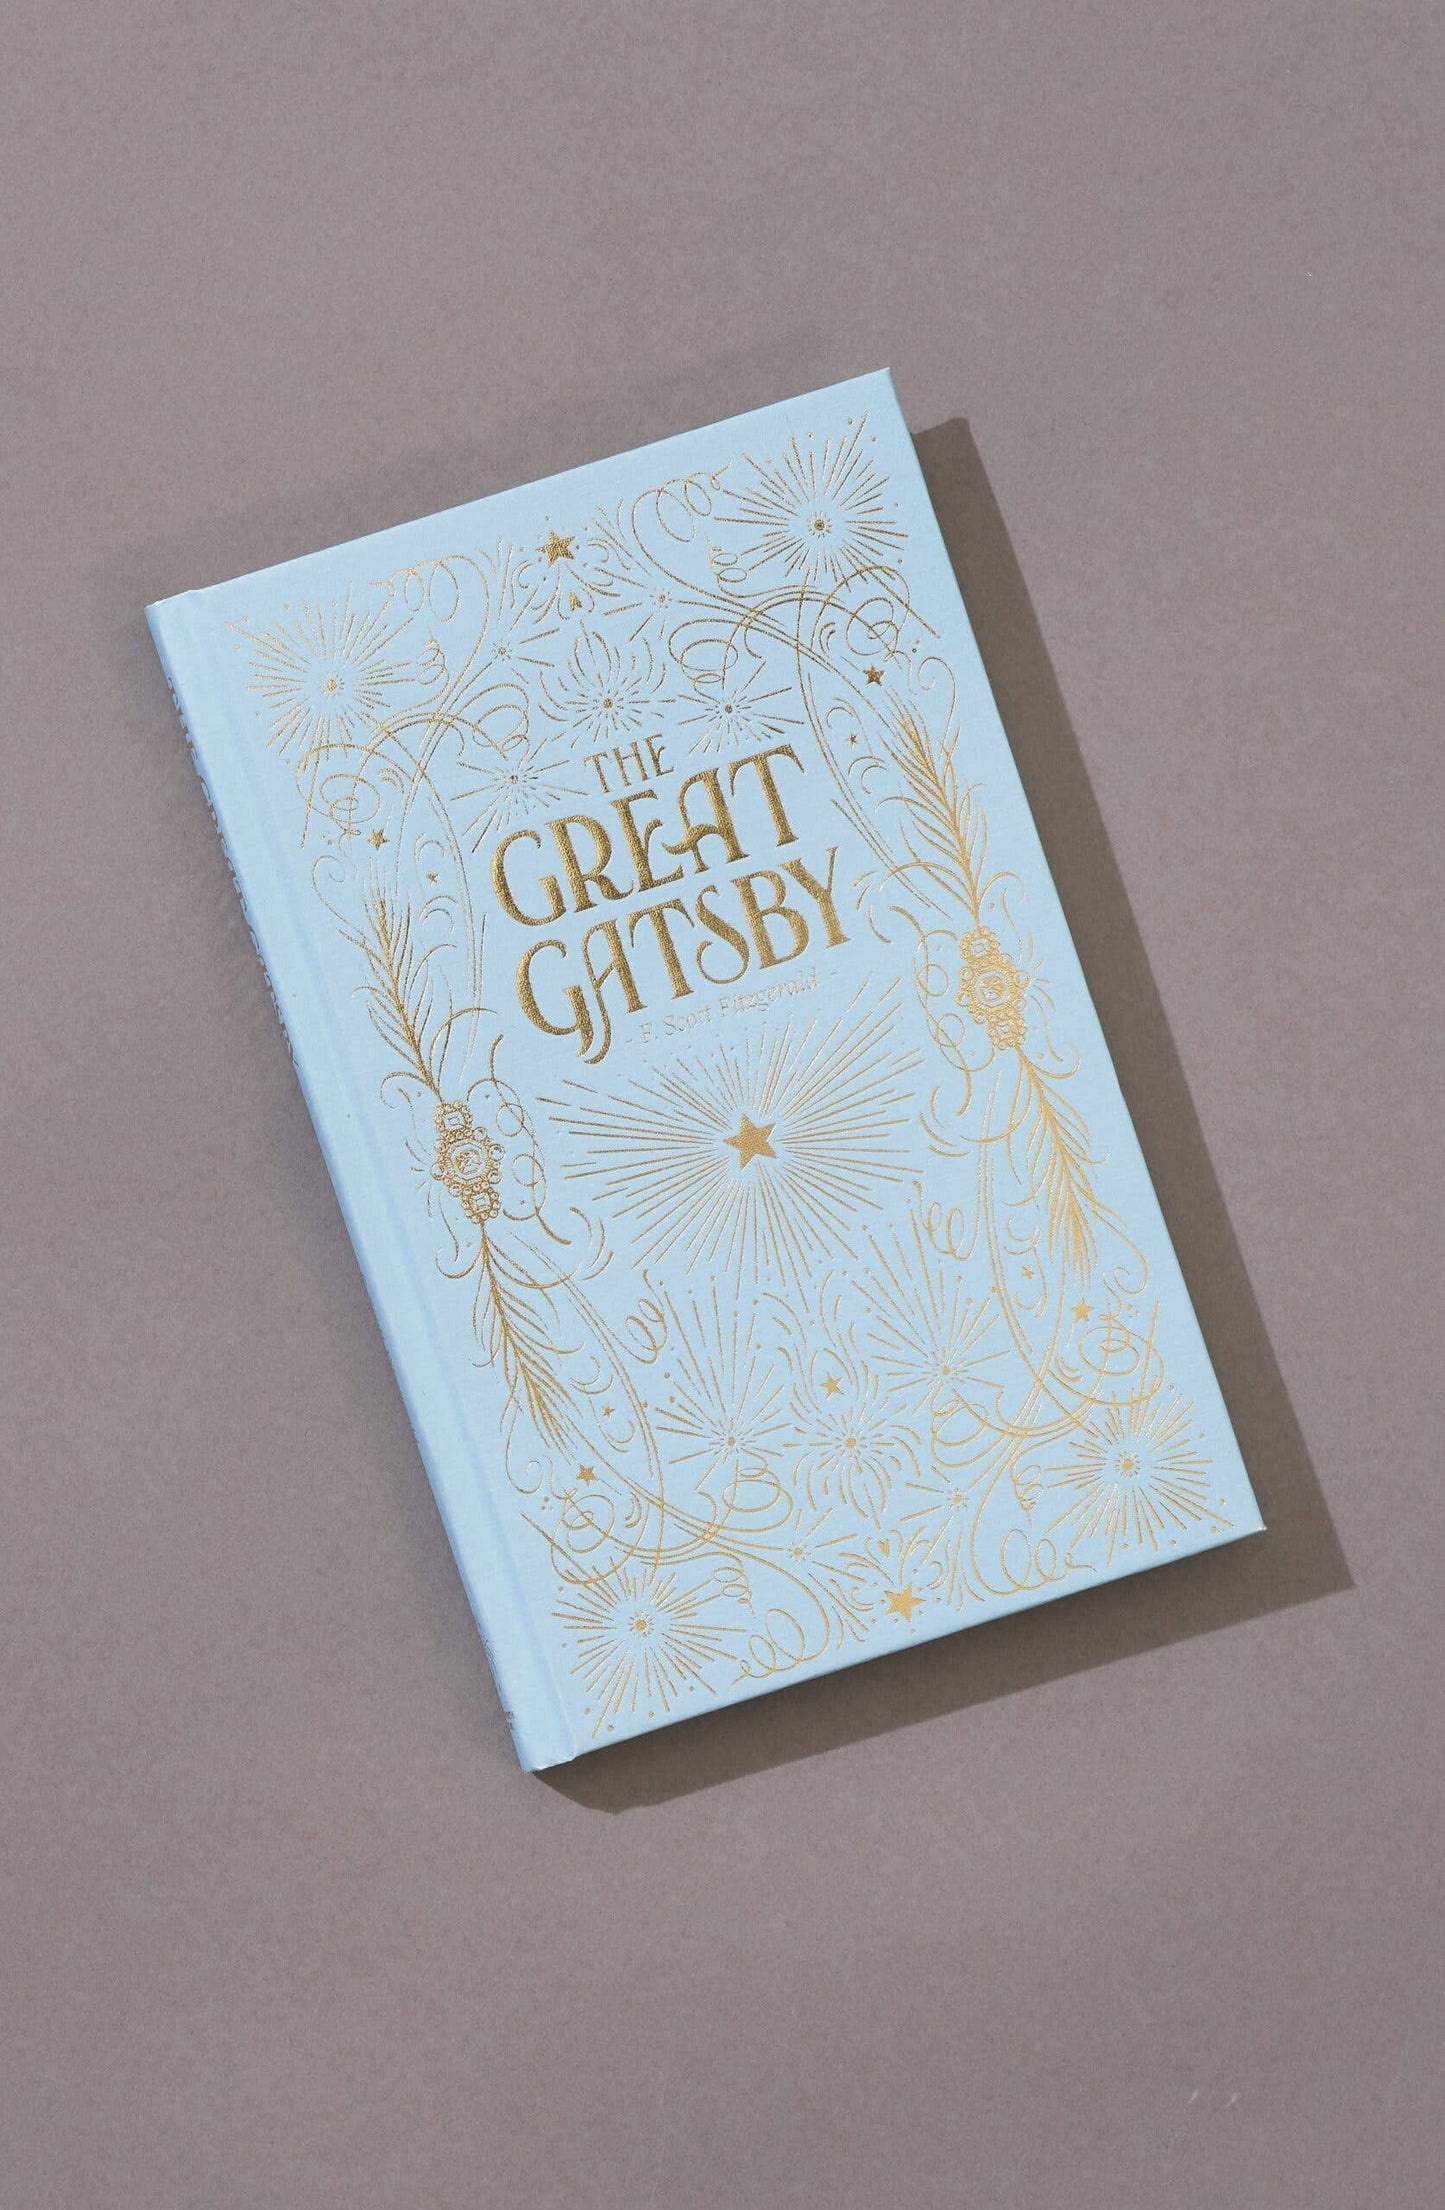 The Great Gatsby | Fitzgerald | Luxe Edition